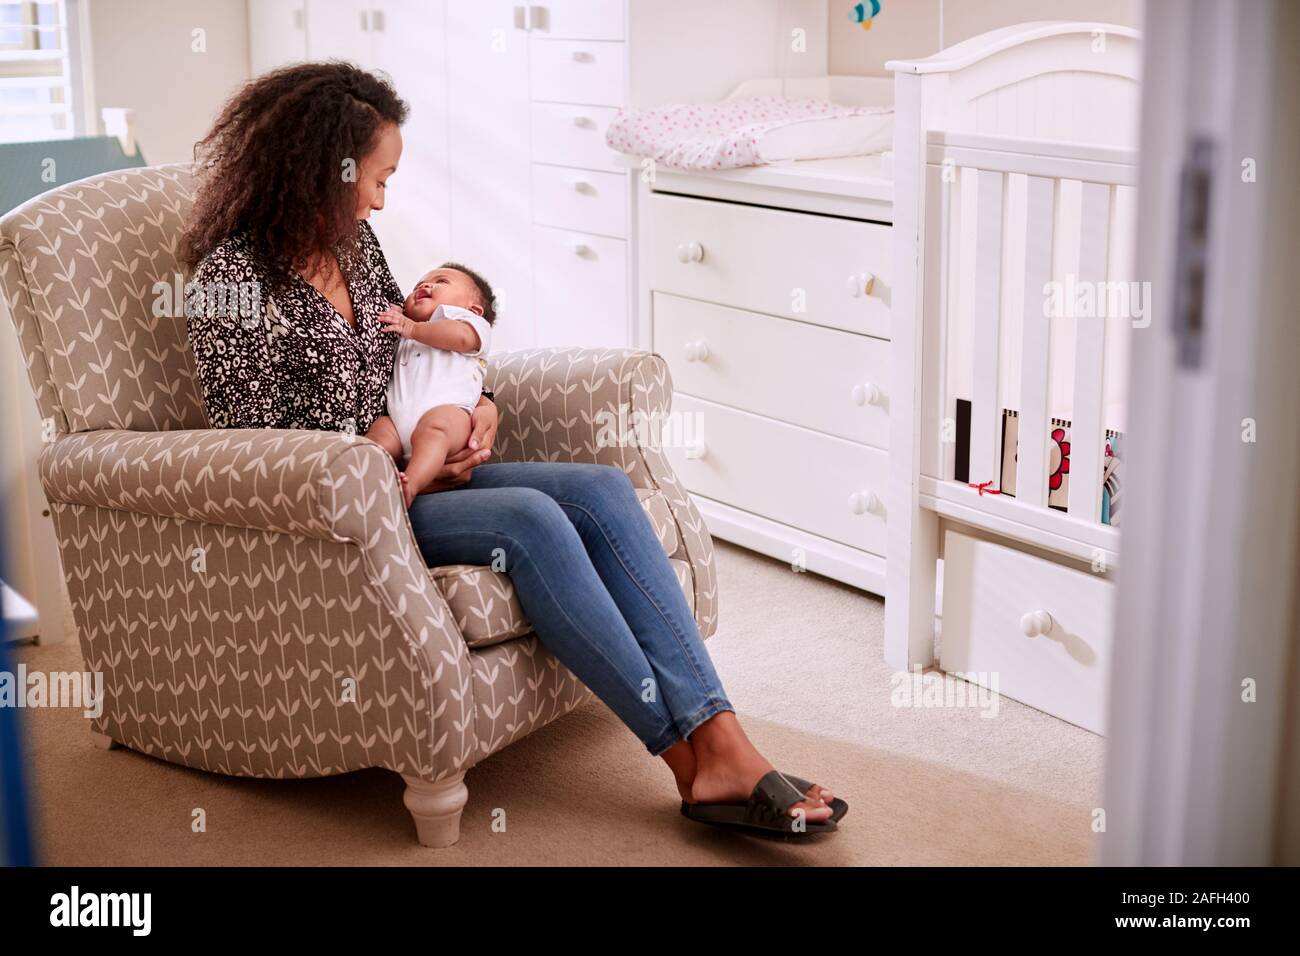 Loving Mother Sitting In Chair Cuddling Baby Son In Nursery At Home Stock Photo